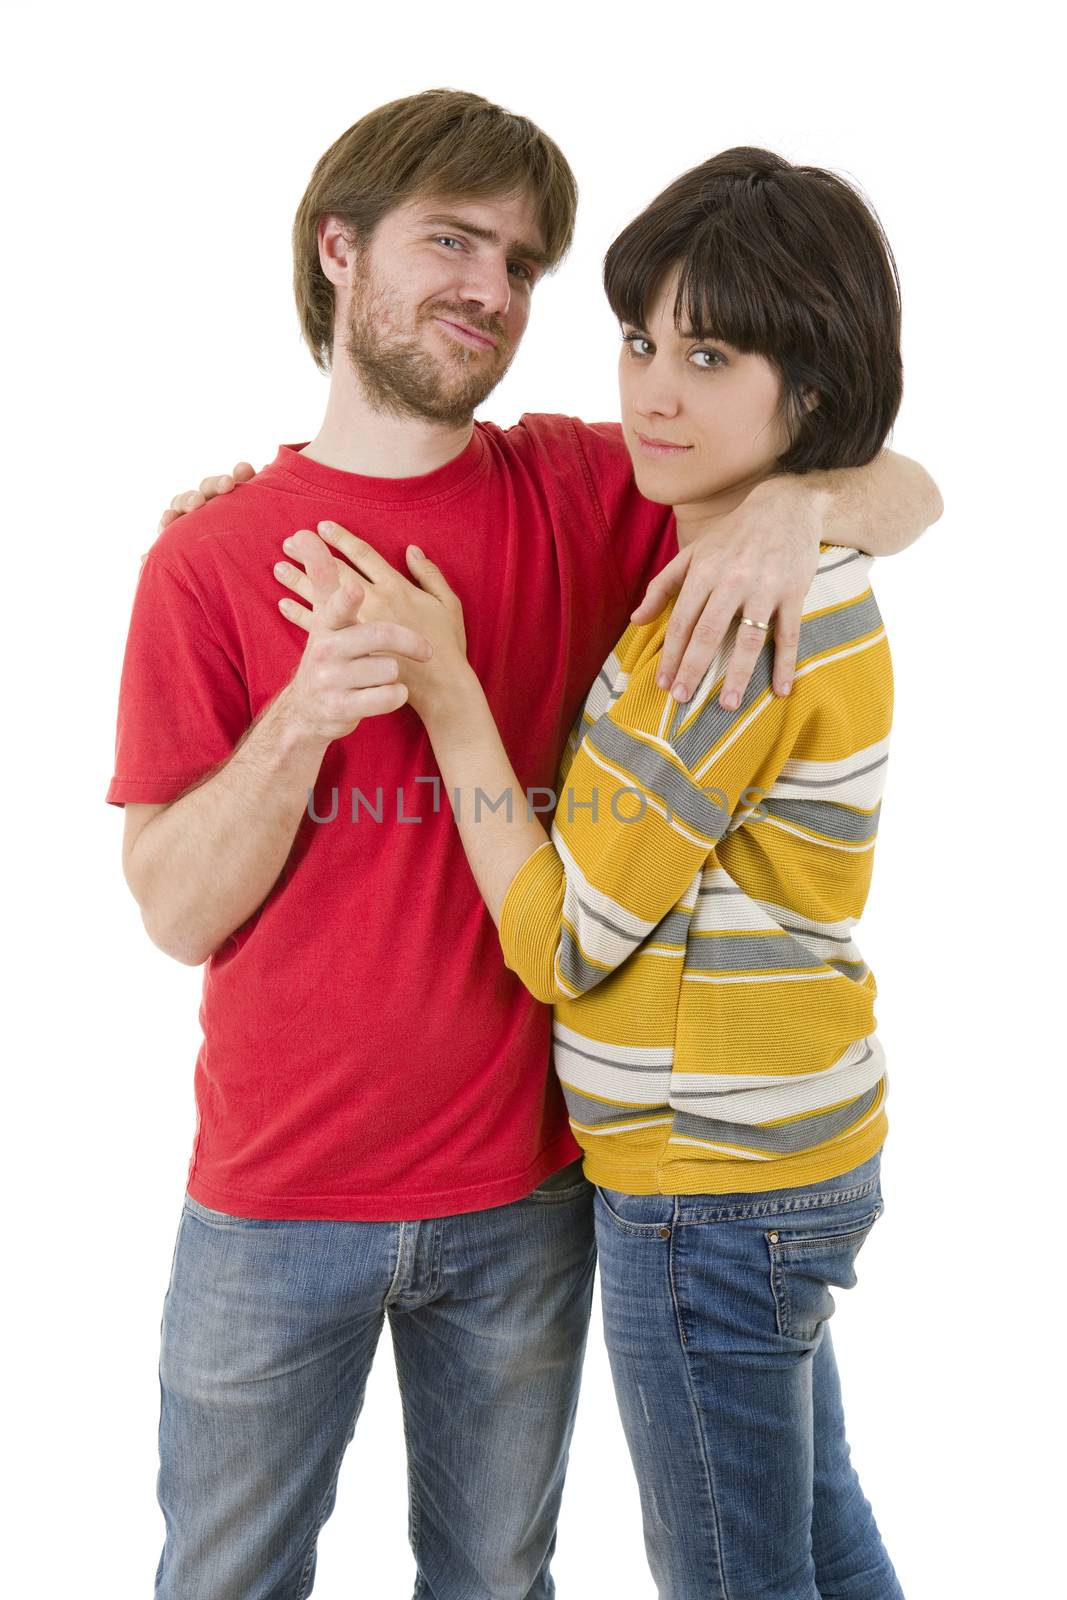 young casual happy couple, isolated on white background